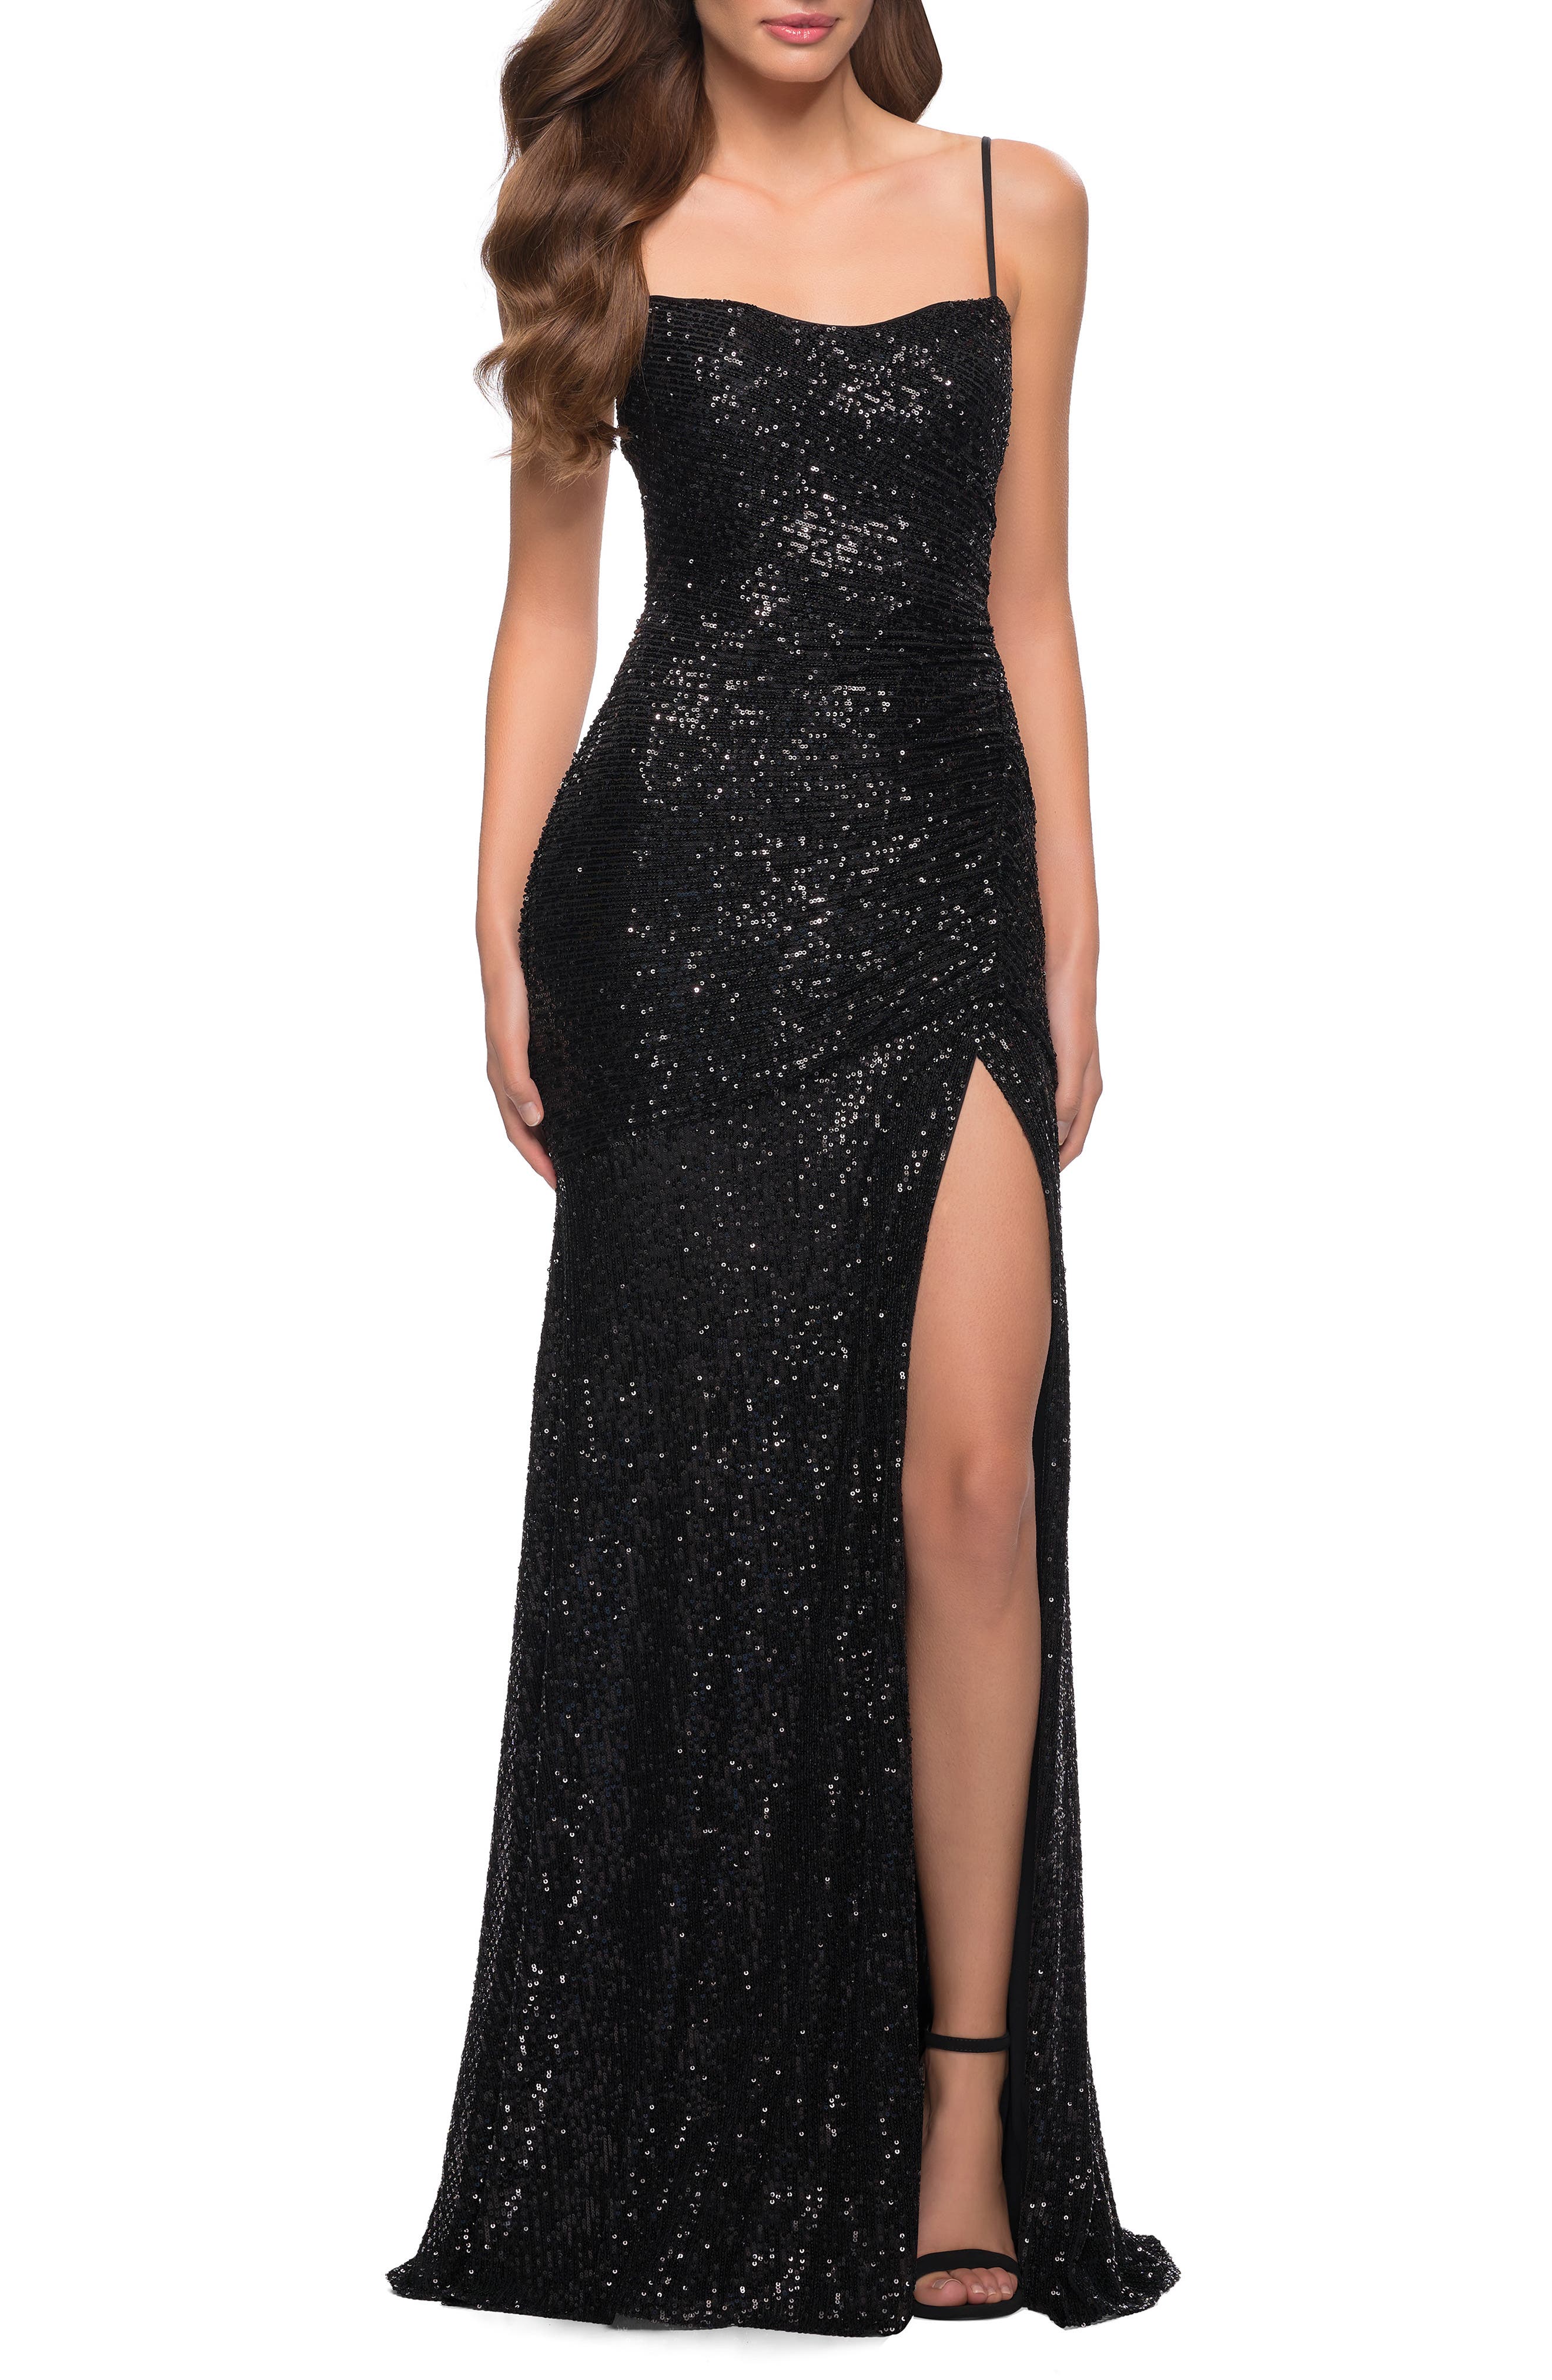 La Femme Strappy Back Sequin Gown ...